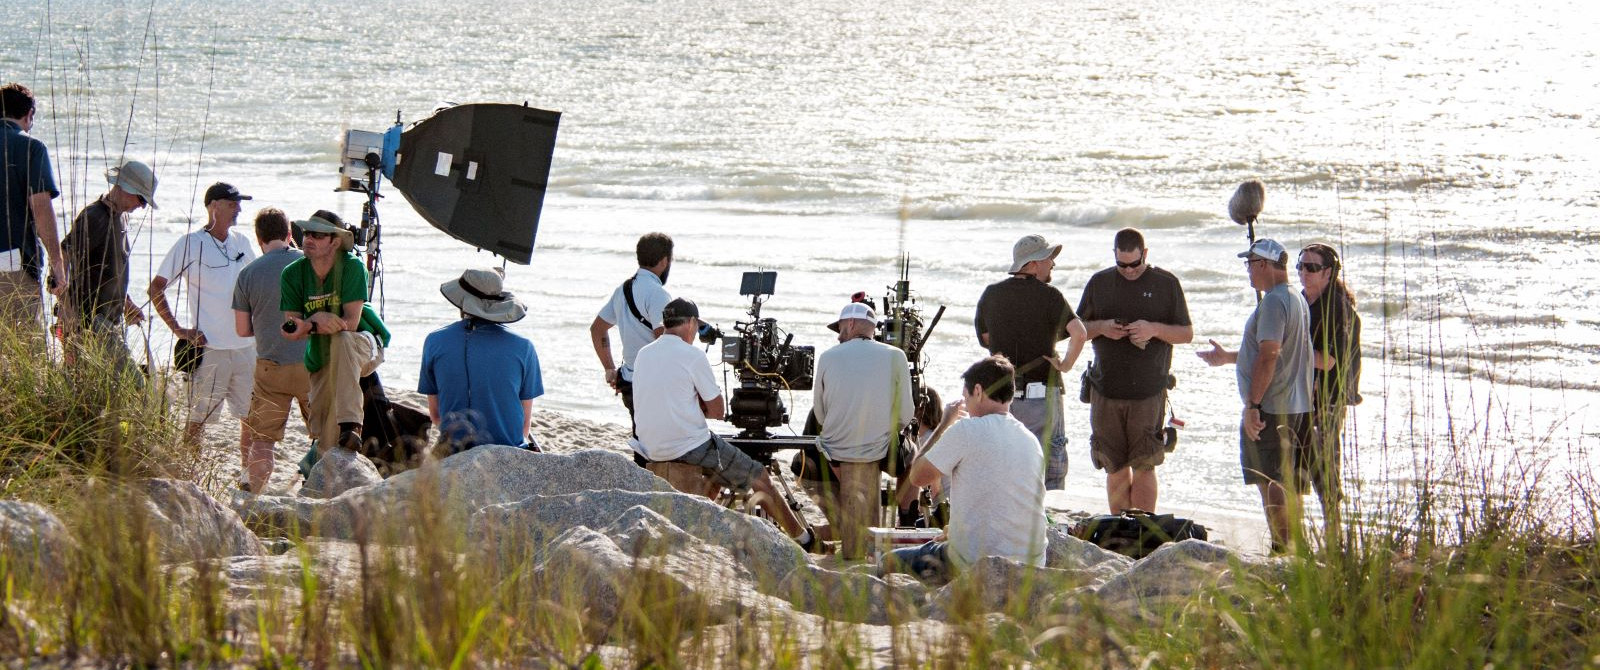 A film crew on the sand dunes in north carolina